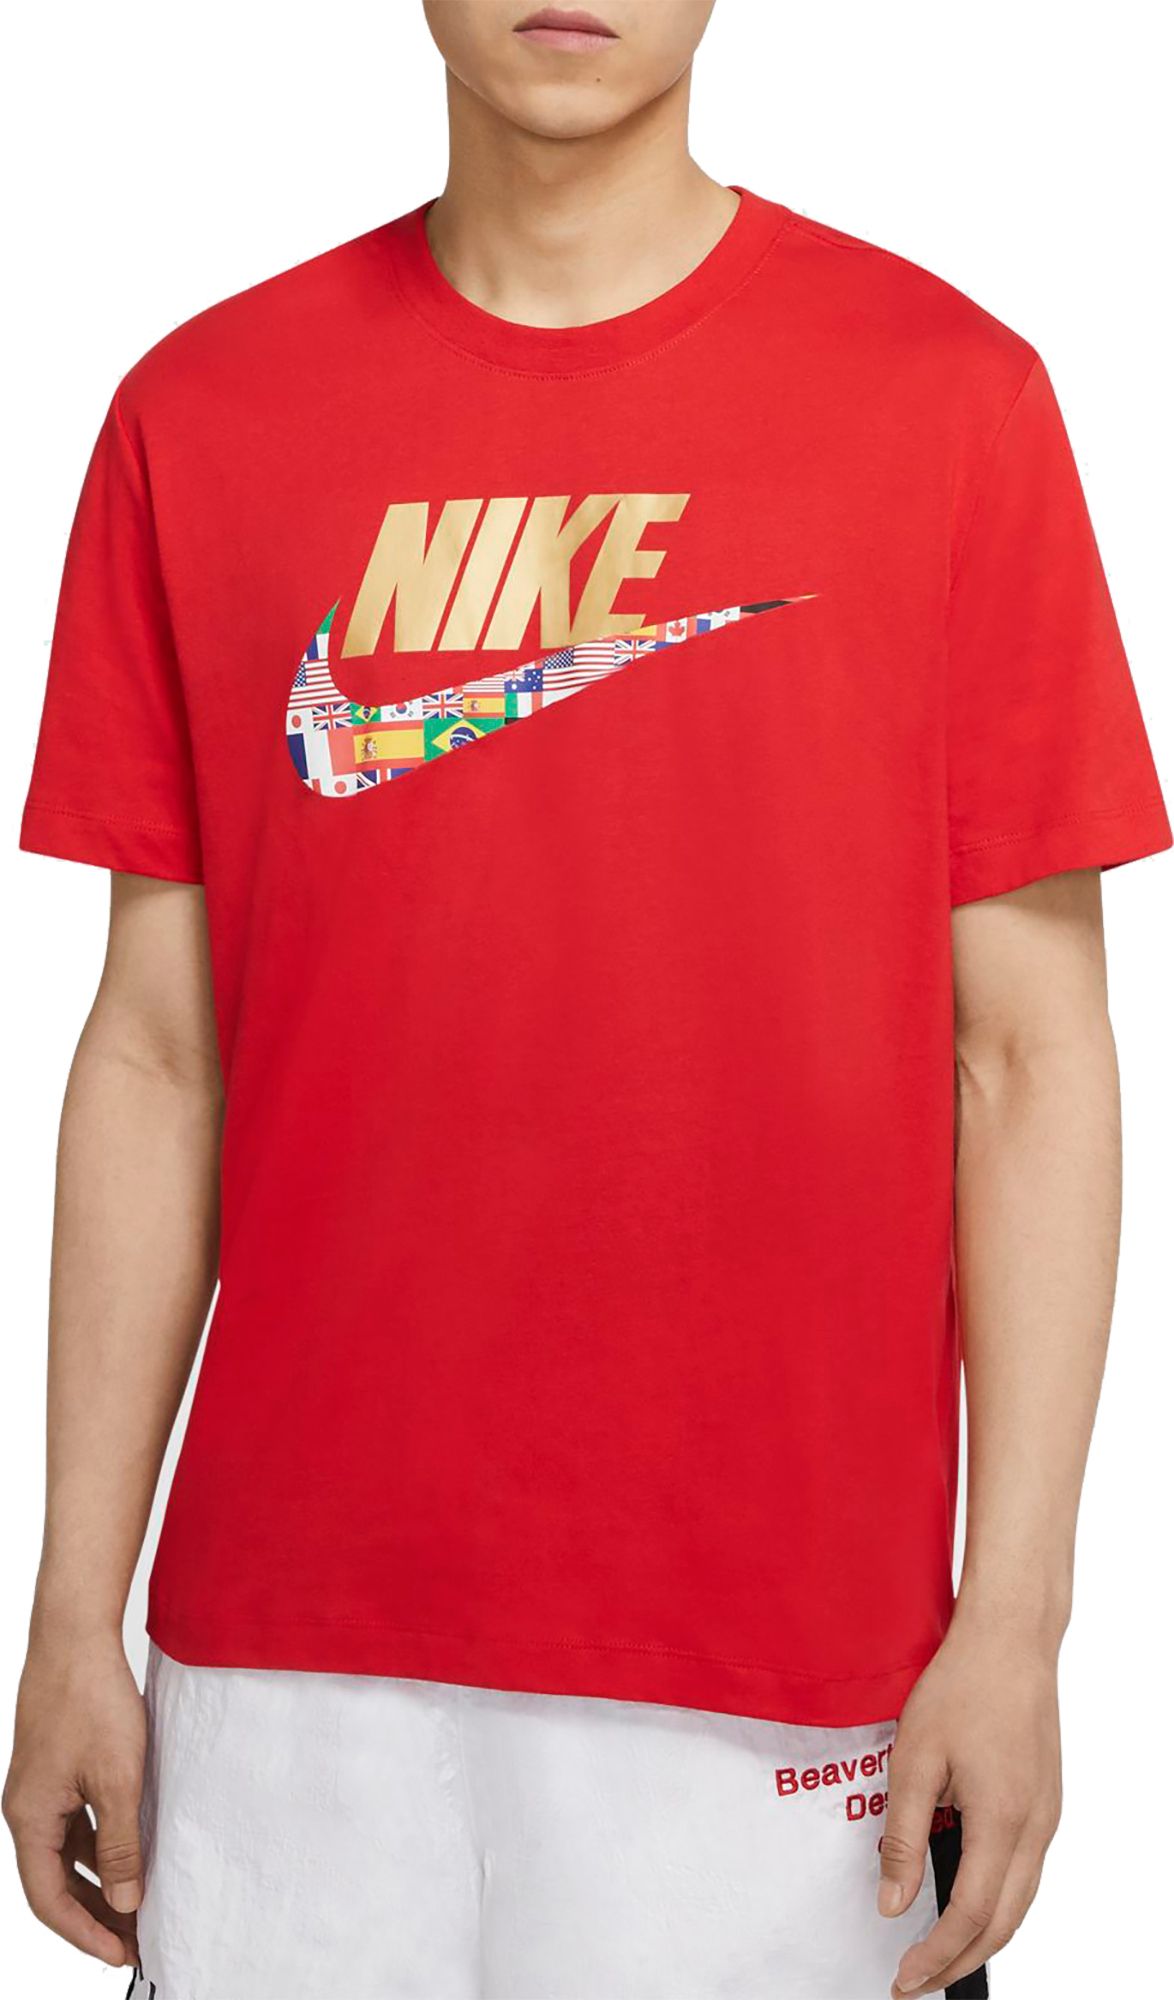 black and red nike tee